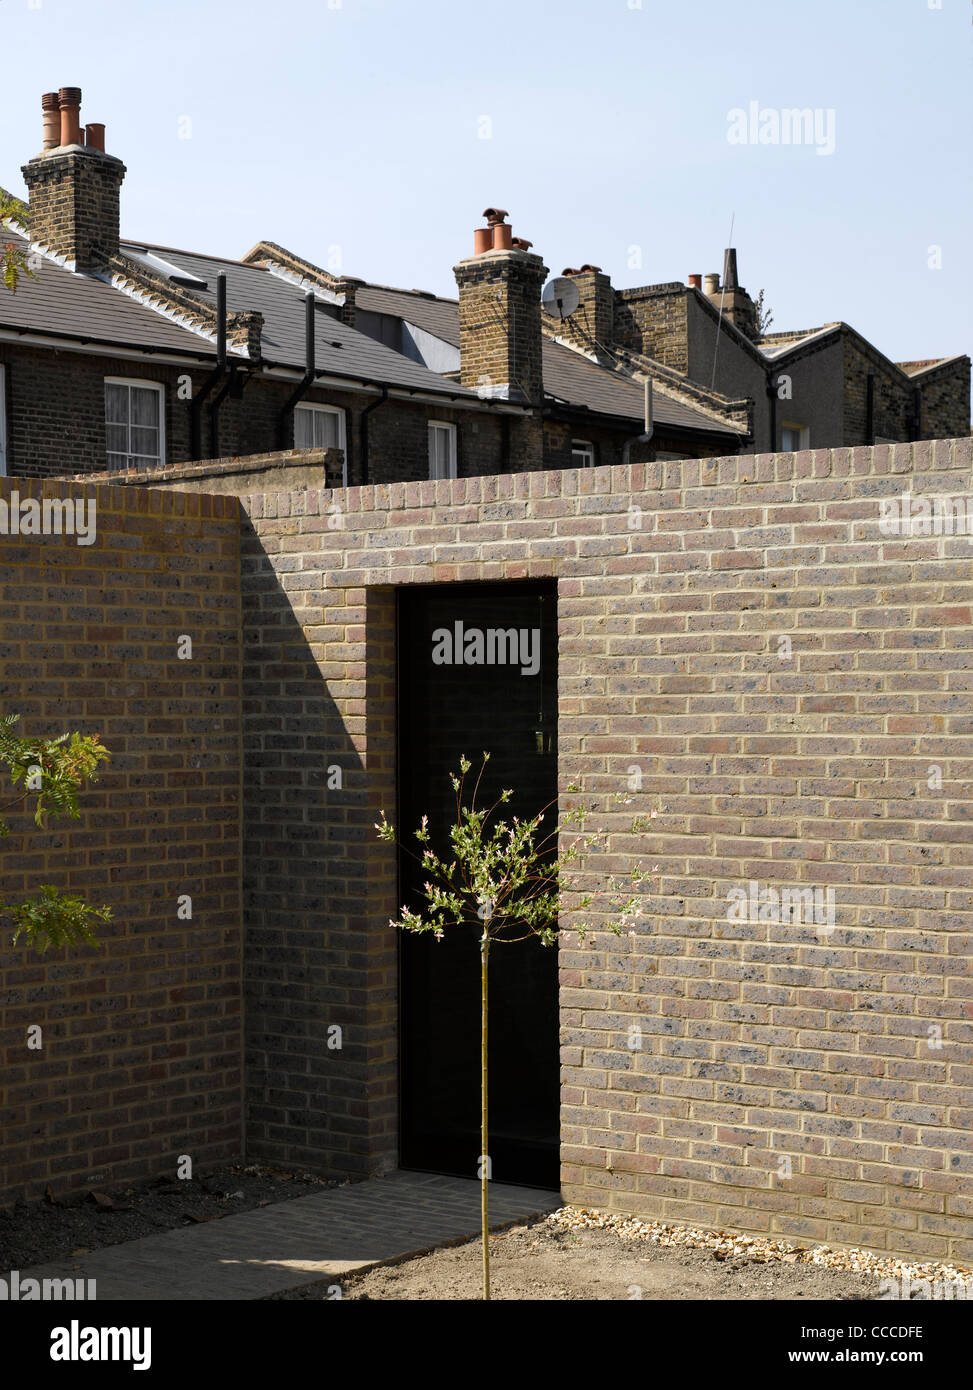 HOUSE ON KINGS GROVE-DUGGAN MORRIS ARCHITECTS-LONDON-EXTERIOR VIEW WITH TREE Stock Photo